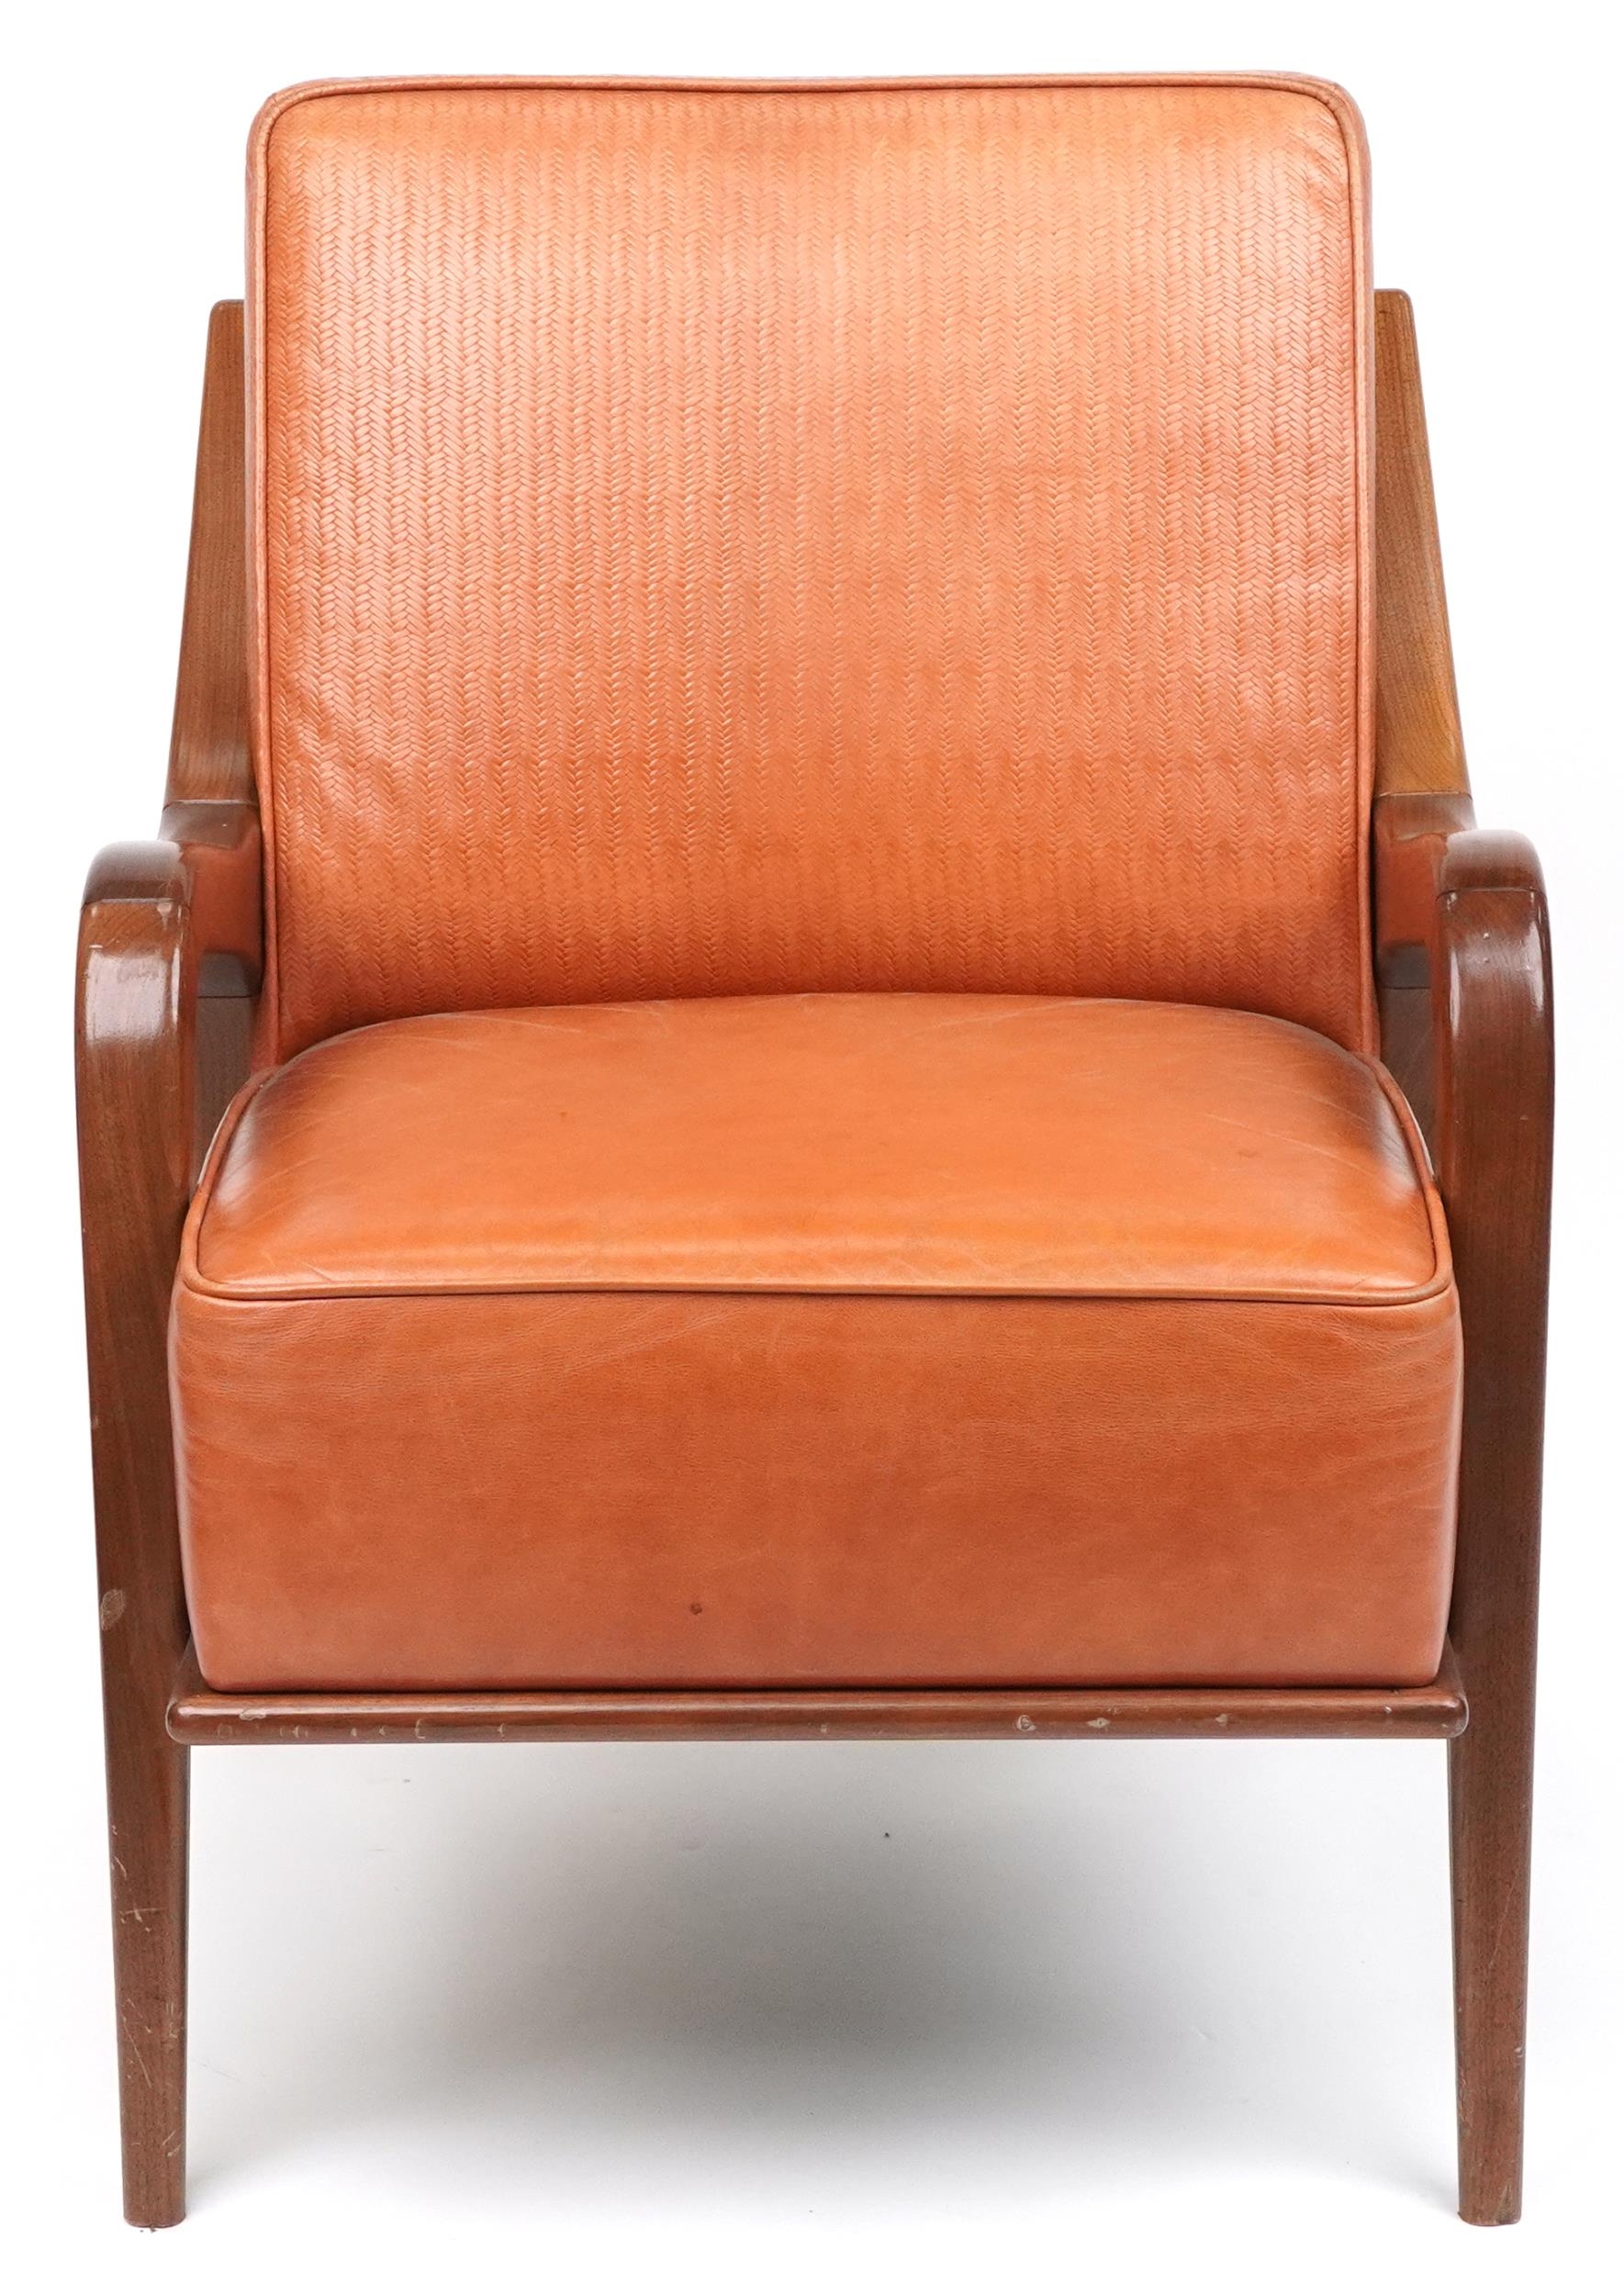 Scandinavian design hardwood lounge chair having a tan upholstered back and seat, 86cm H x 62.5cm - Image 2 of 4